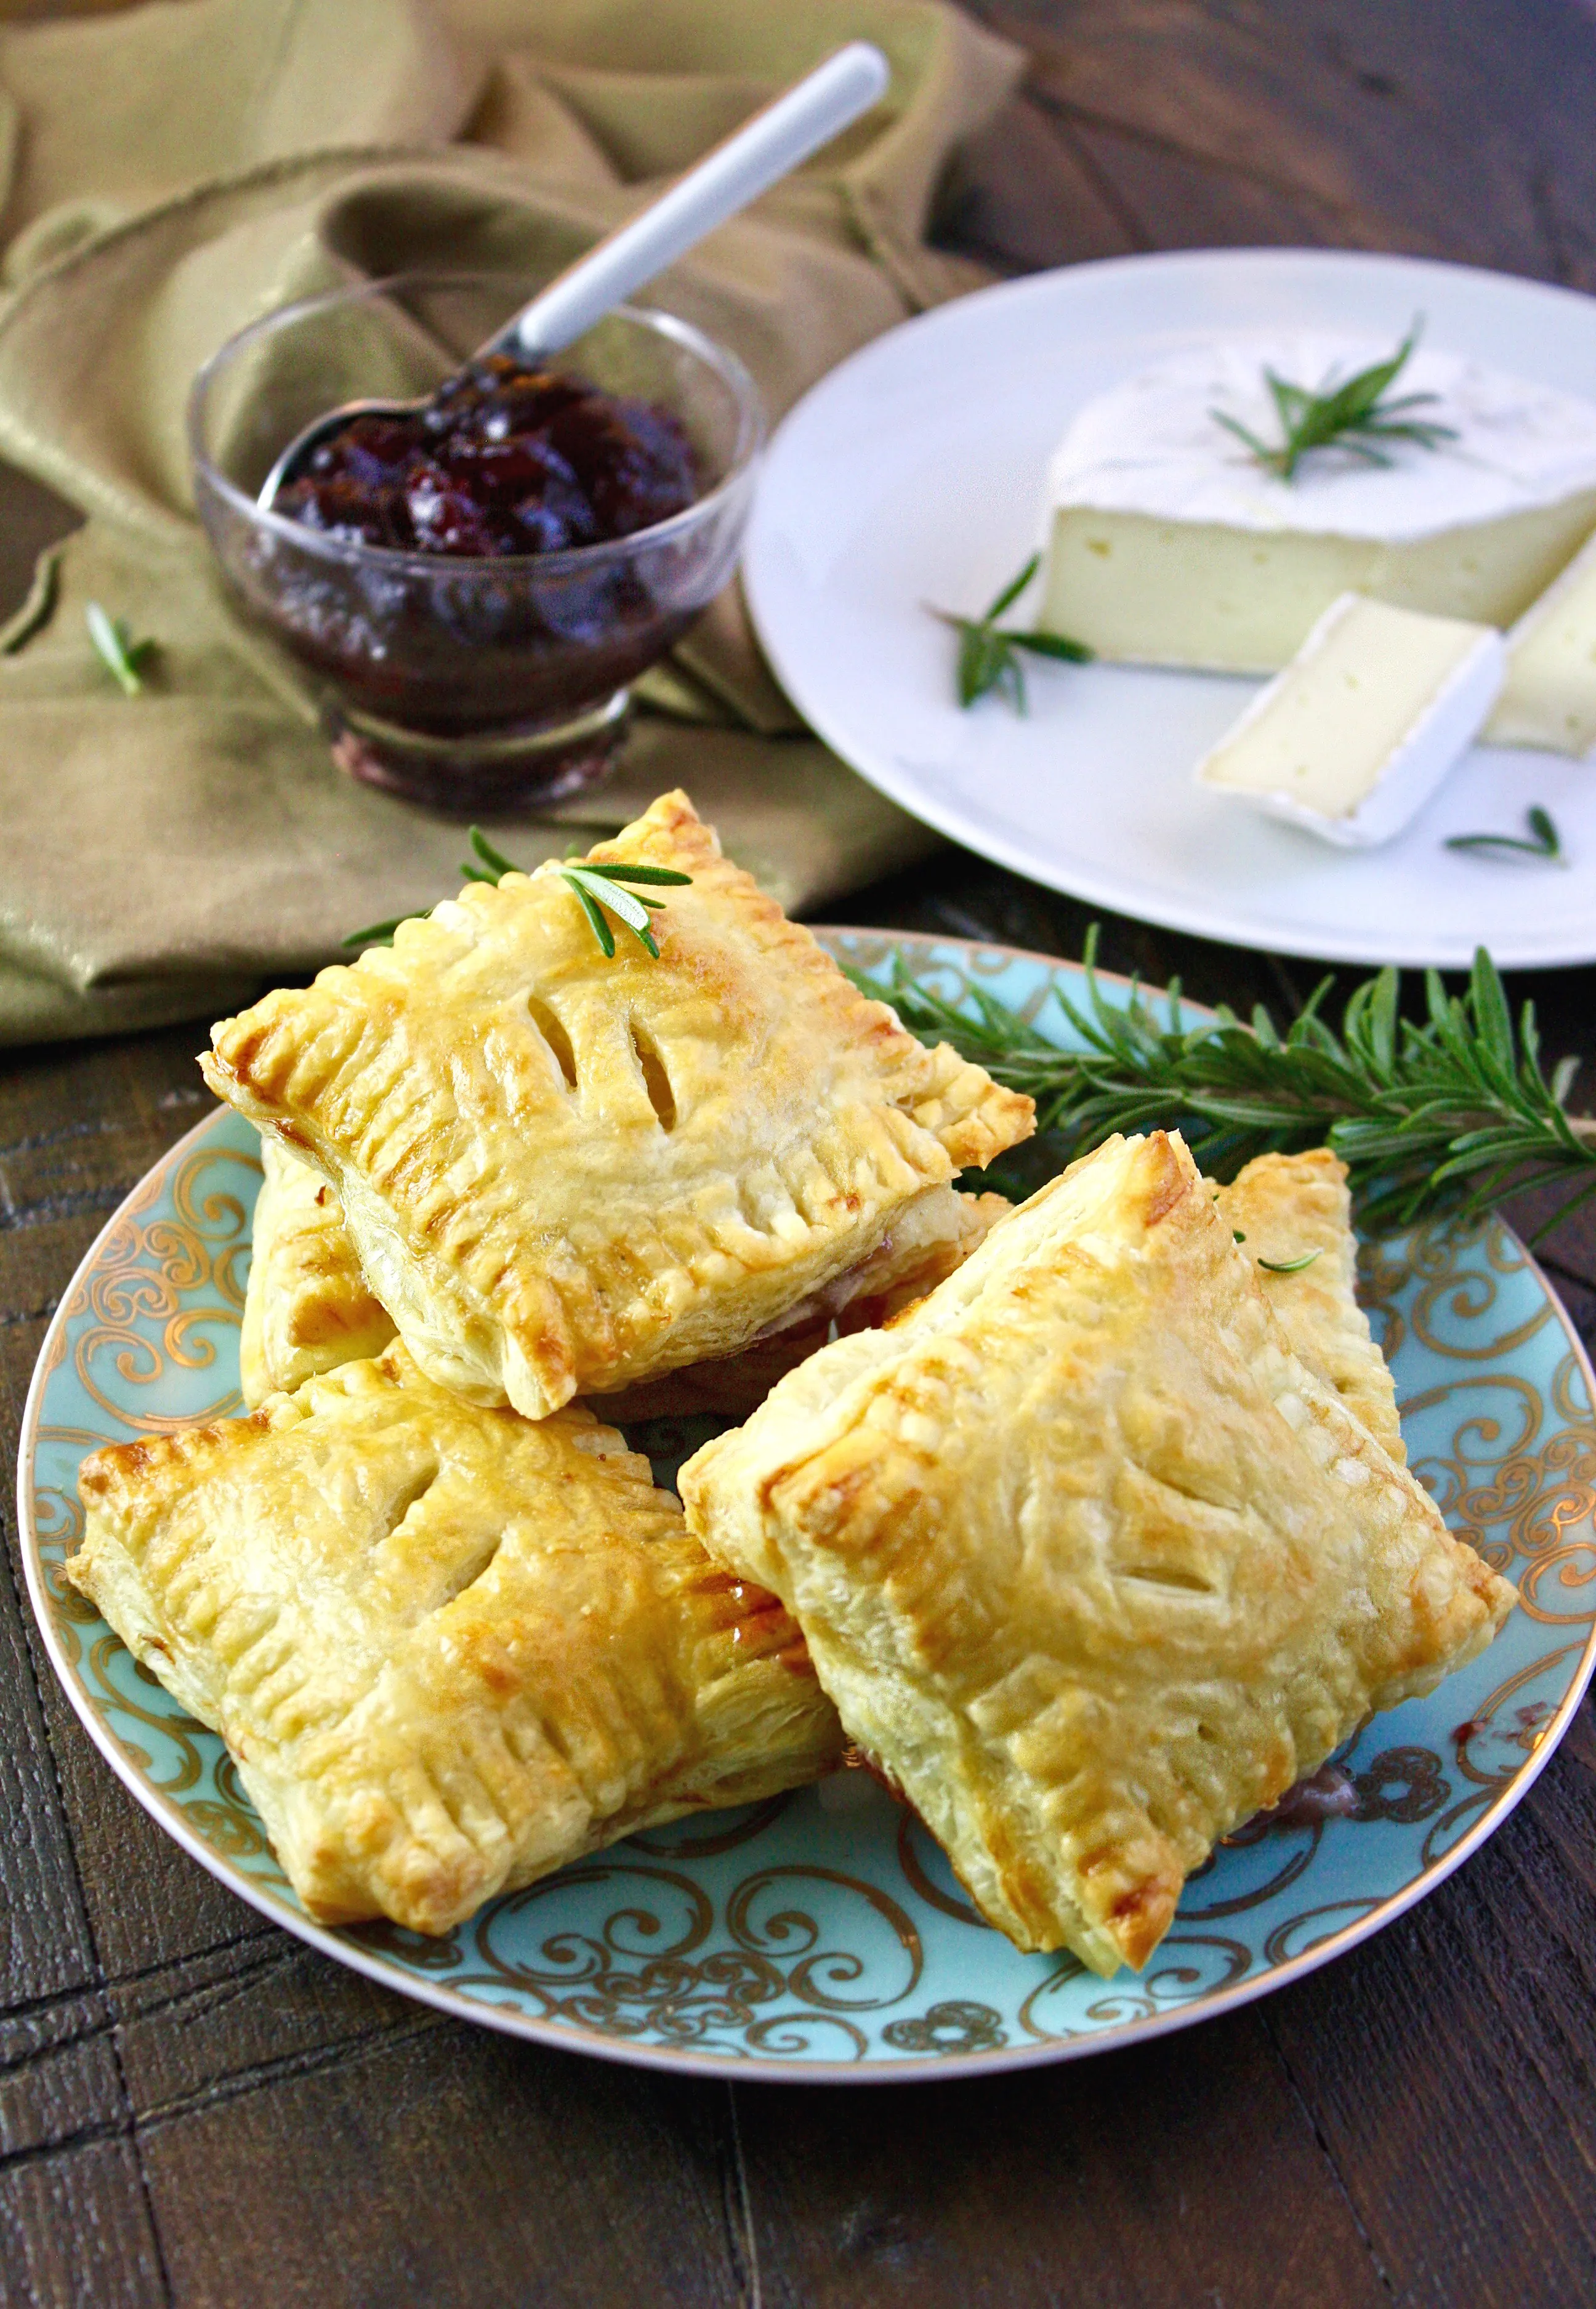 Perfectly delicious and easy to make, Easy Brie and Cherry Puff Pastry Squares are great for a gathering!